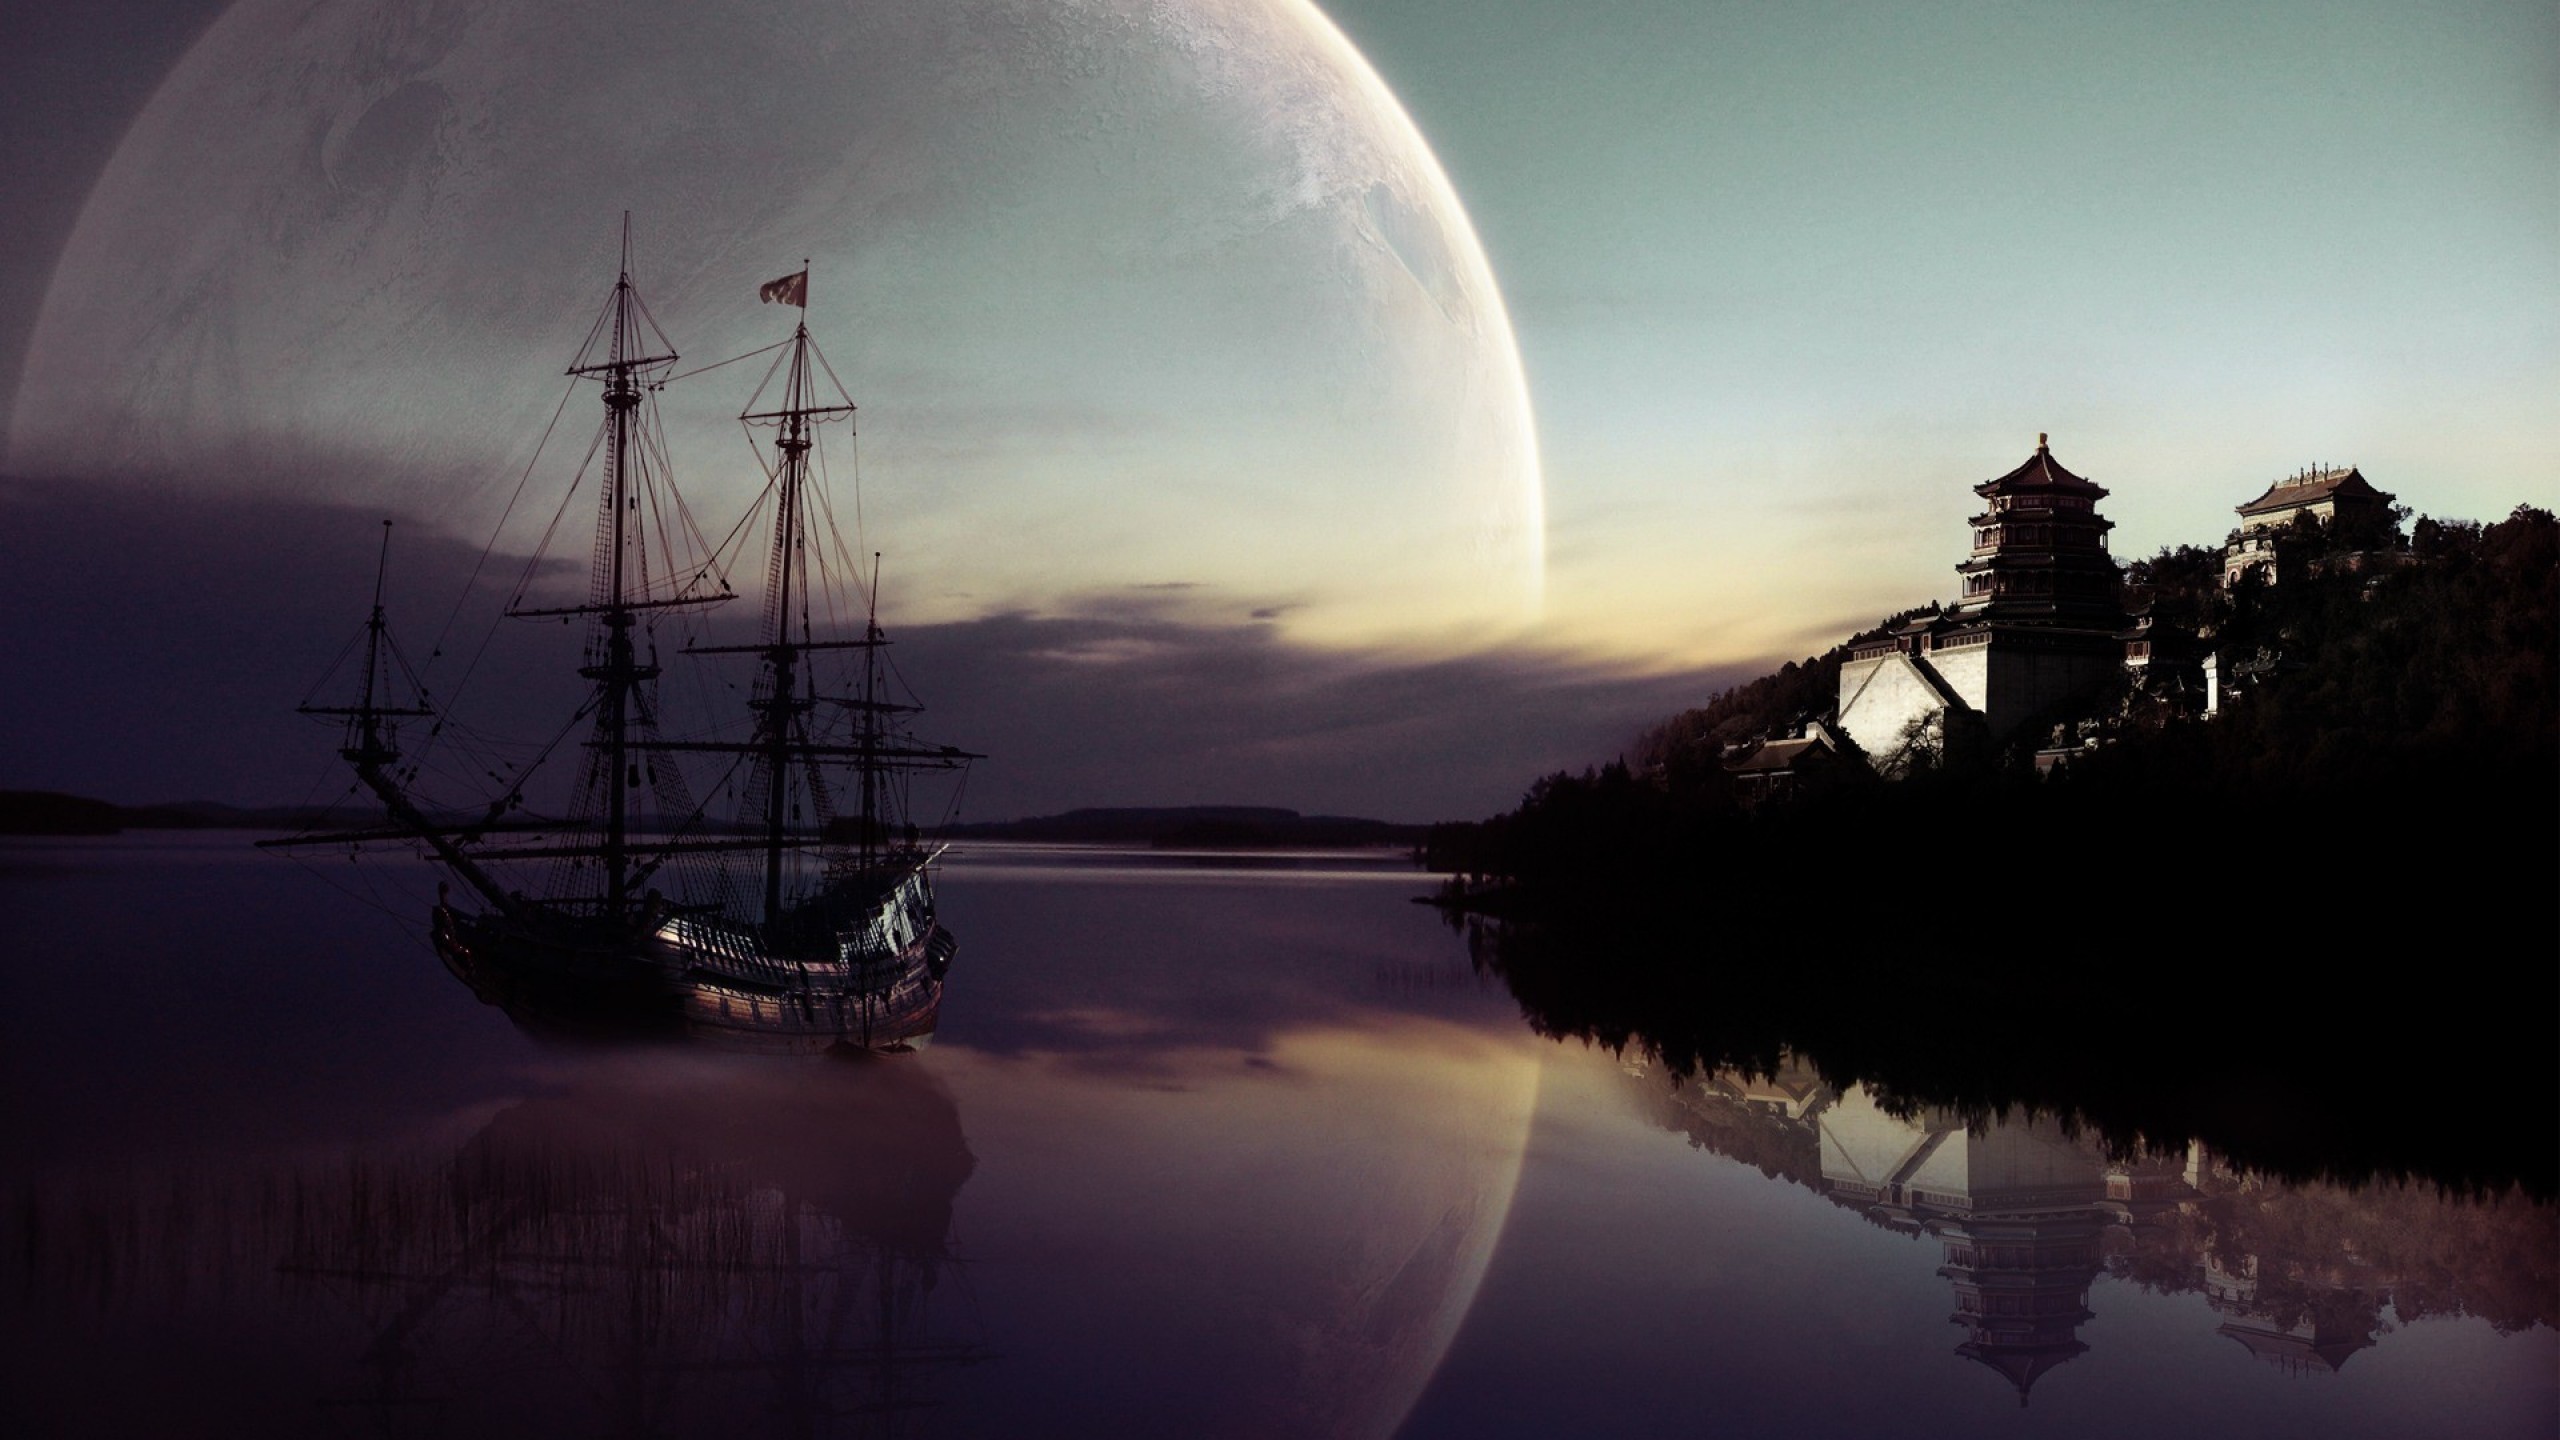 2560x1440 Find out: Pirate Ship wallpaper on http://hdpicorner.com/pirate